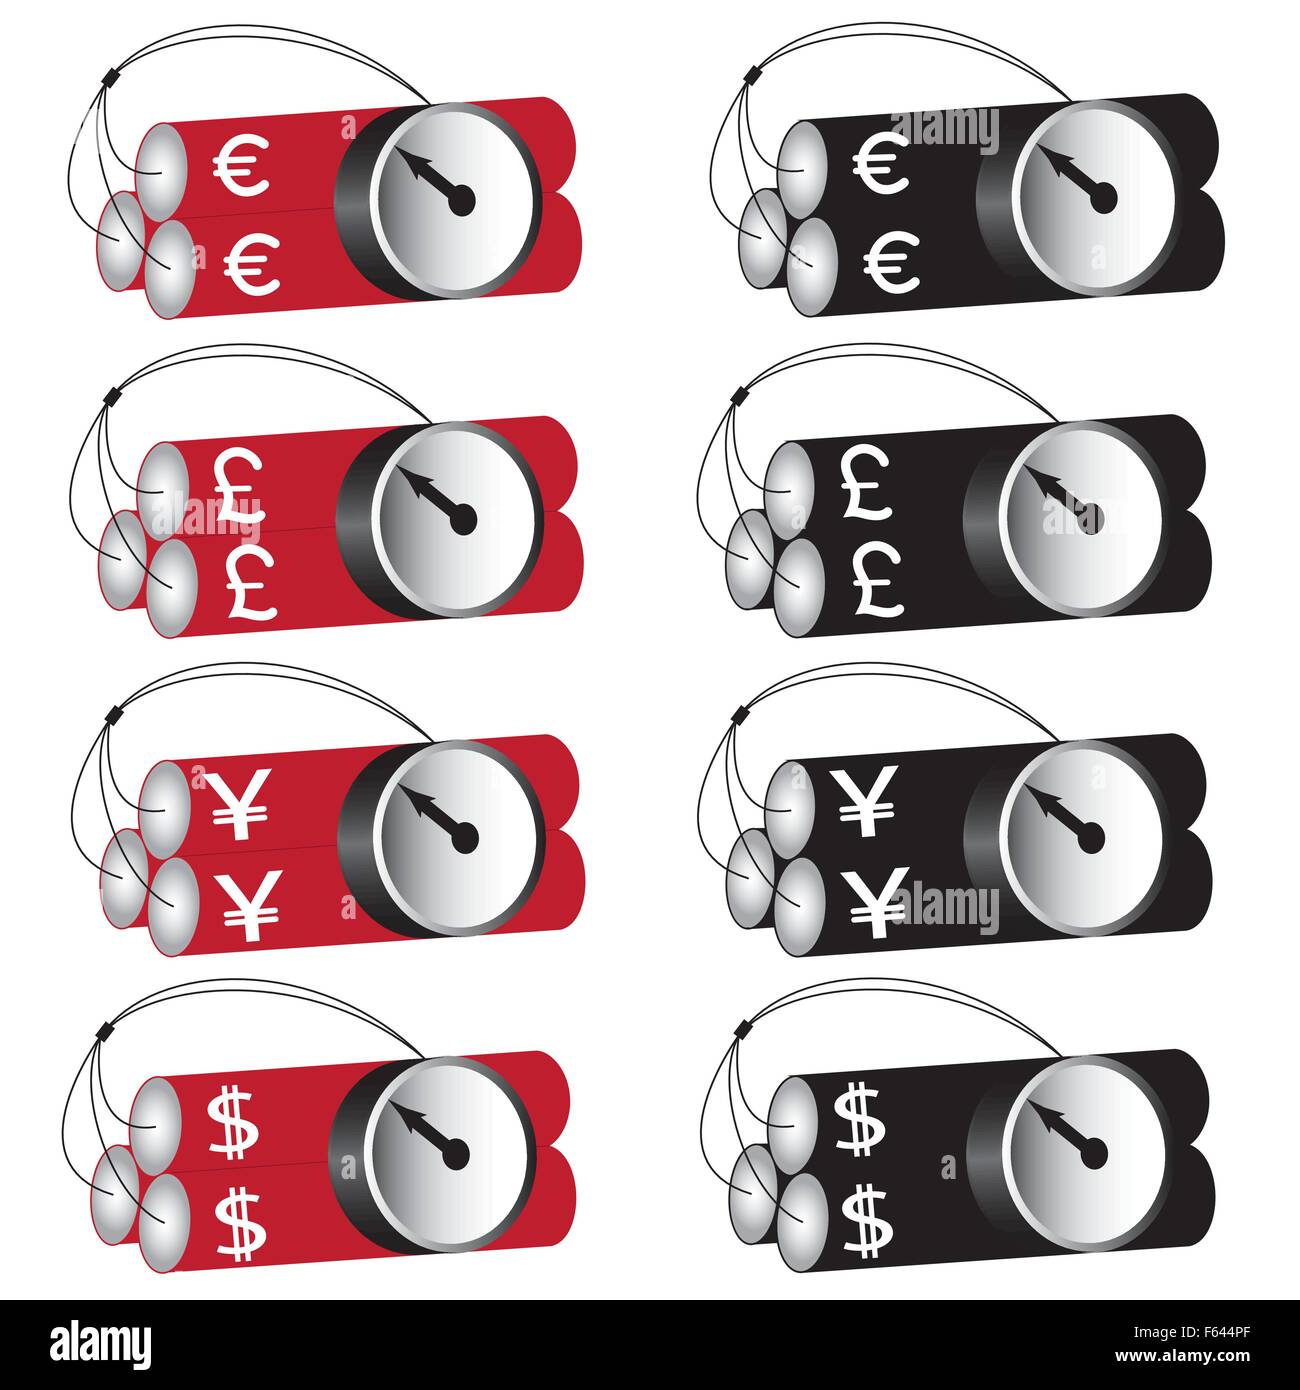 World currency time bomb in red and black. USD, EURO, GBP and JPY Stock Vector